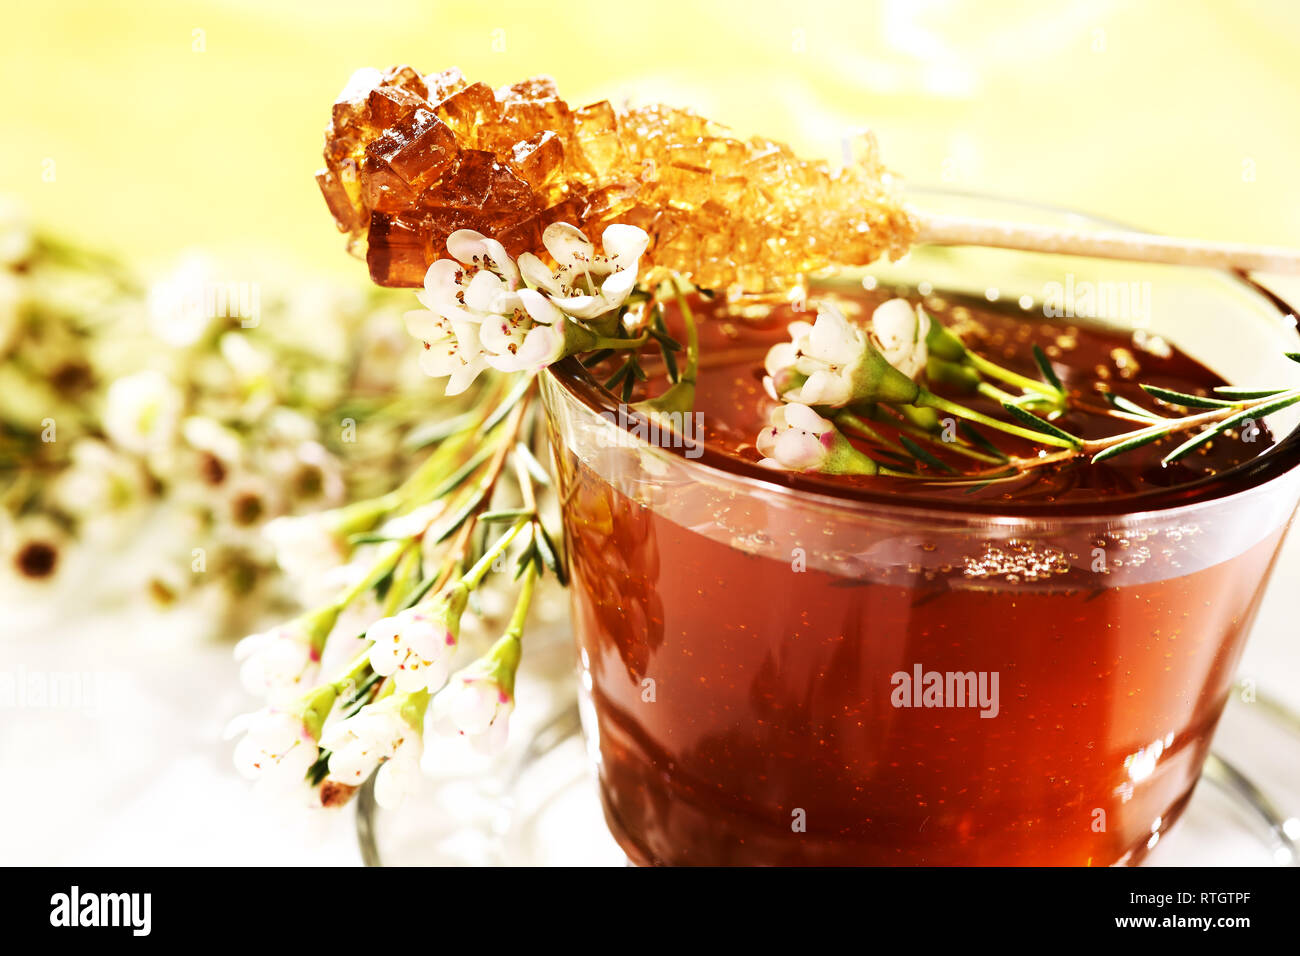 Beautifully decorated flower honey in a glass. On top there is a candy sugar stick. Stock Photo